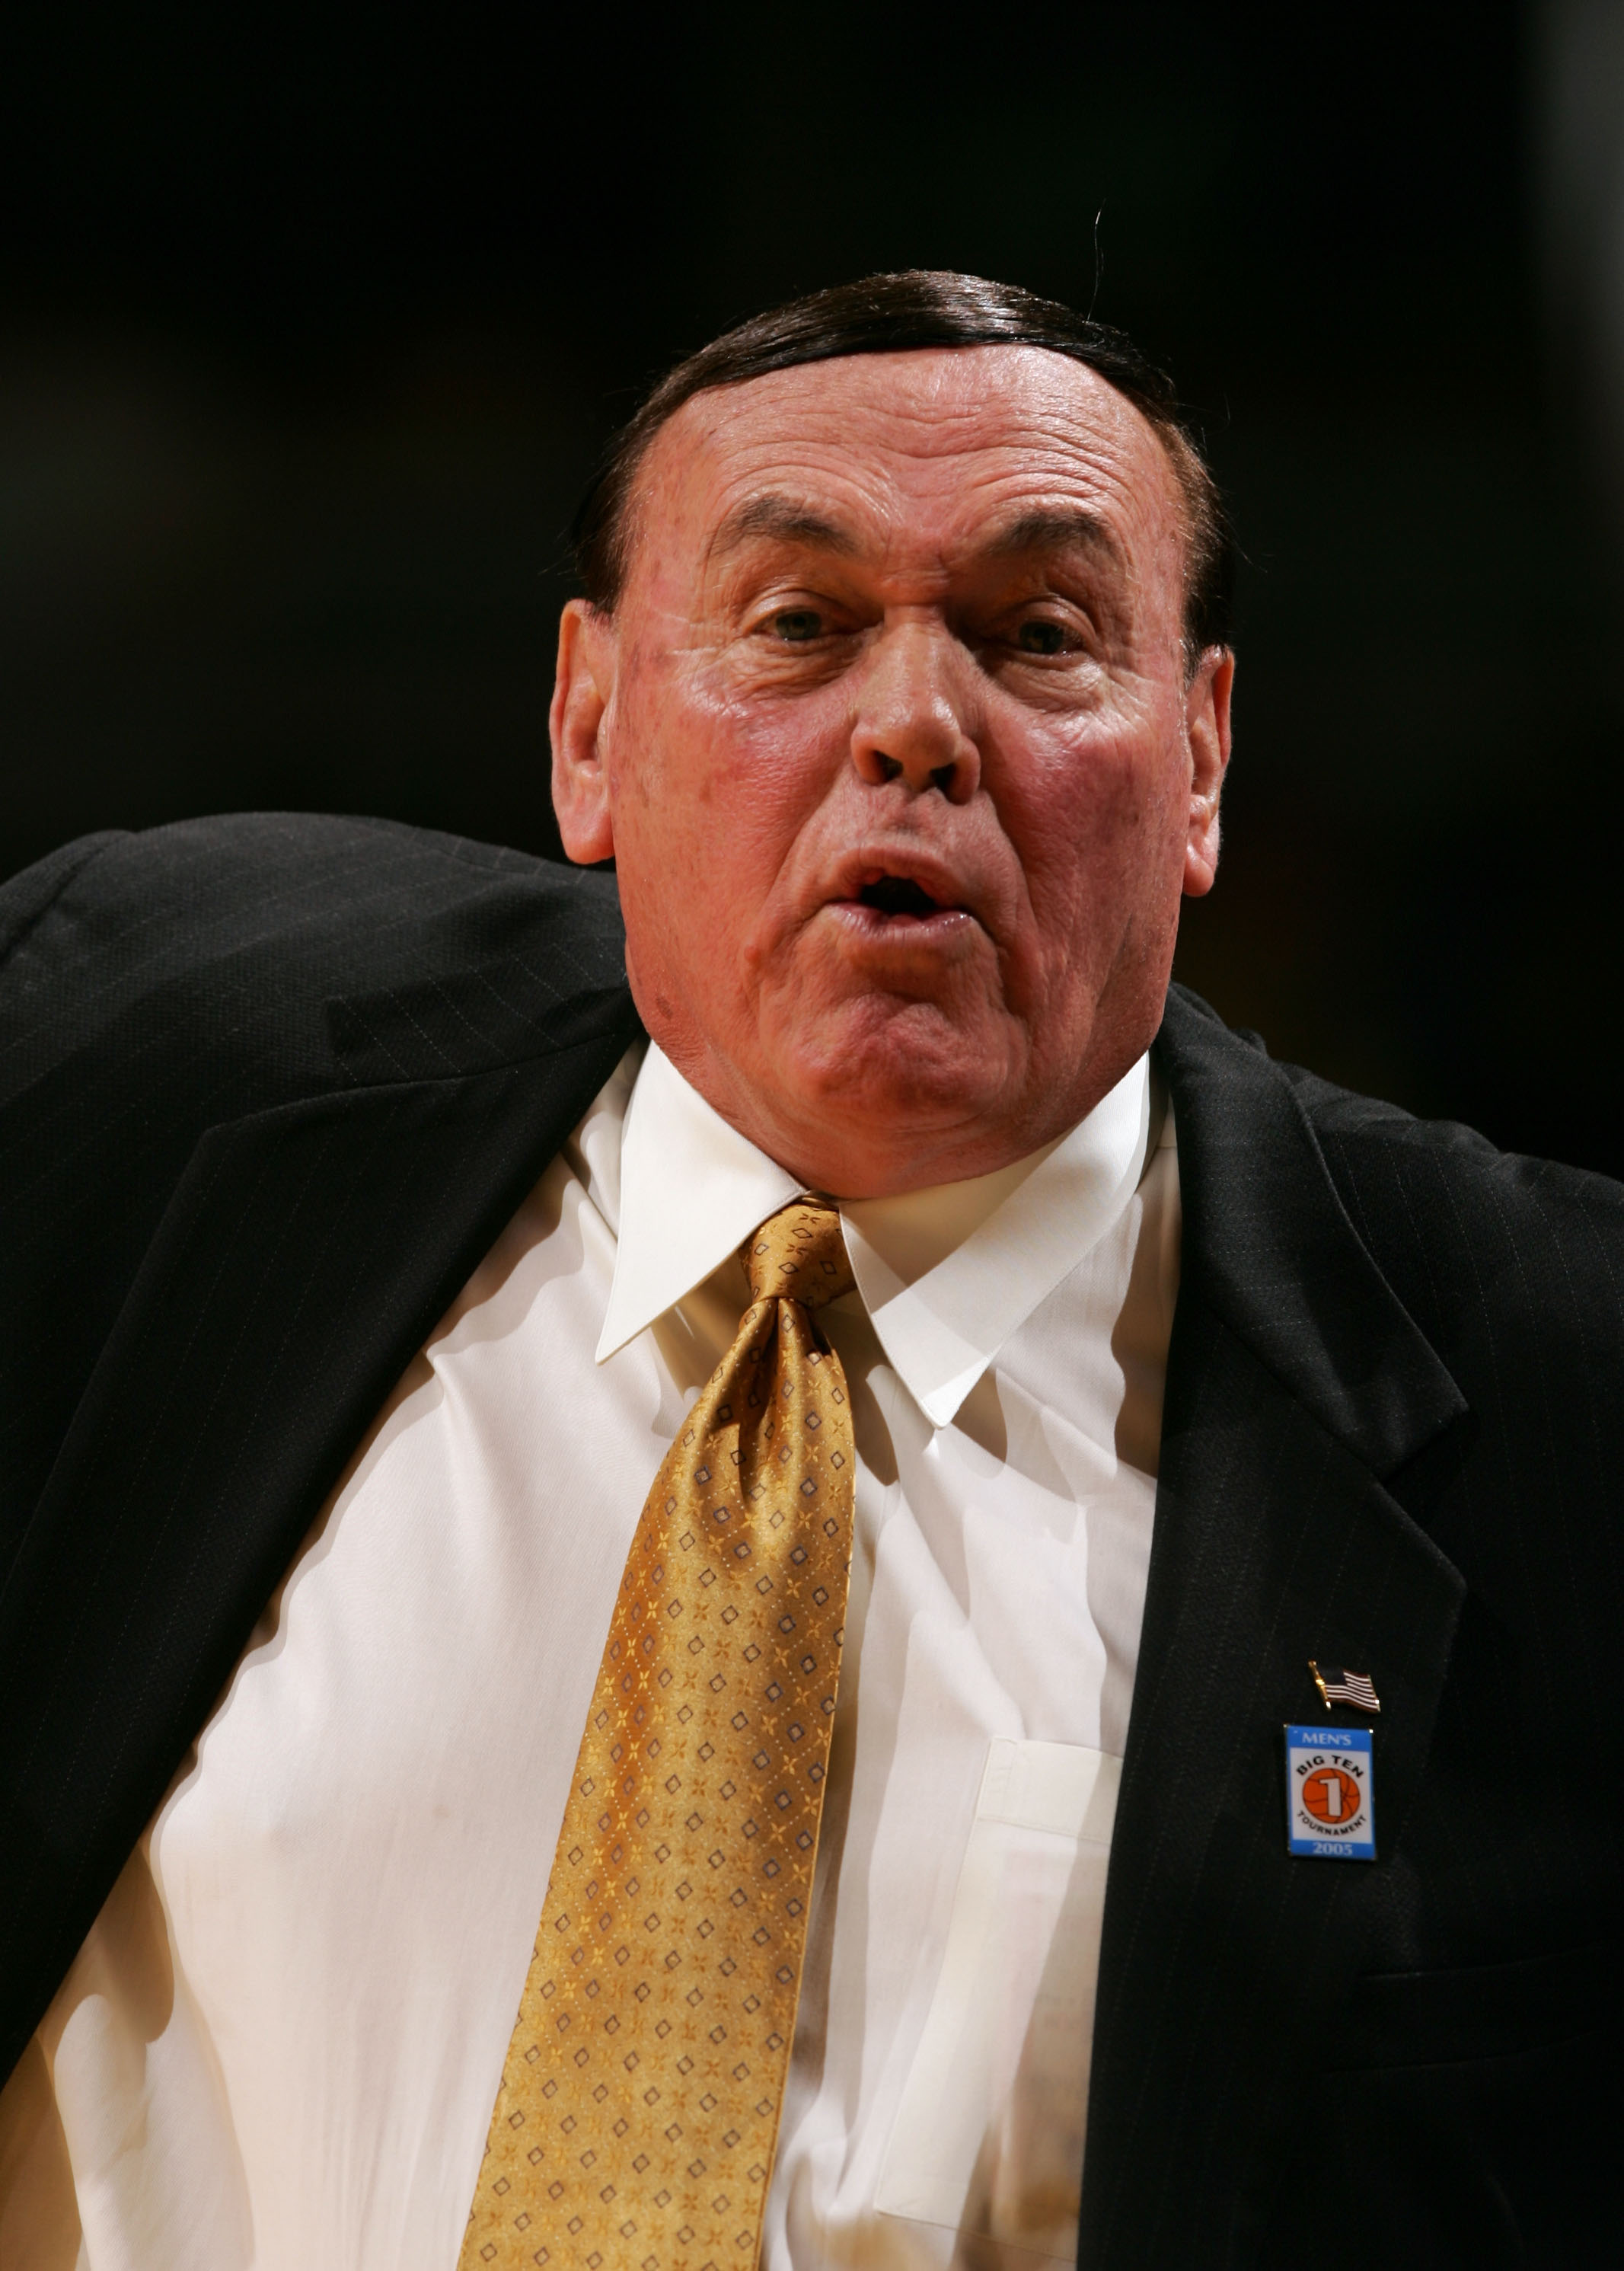 CHICAGO - MARCH 10:  Head coach Gene Keady of the Purdue Boilermakers reacts against the Iowa Hawkeyes during the first day of the Big Ten Men's Conference Basketball Tournament March 10, 2005 at the United Center in Chicago, Illinois. The game was Keady'